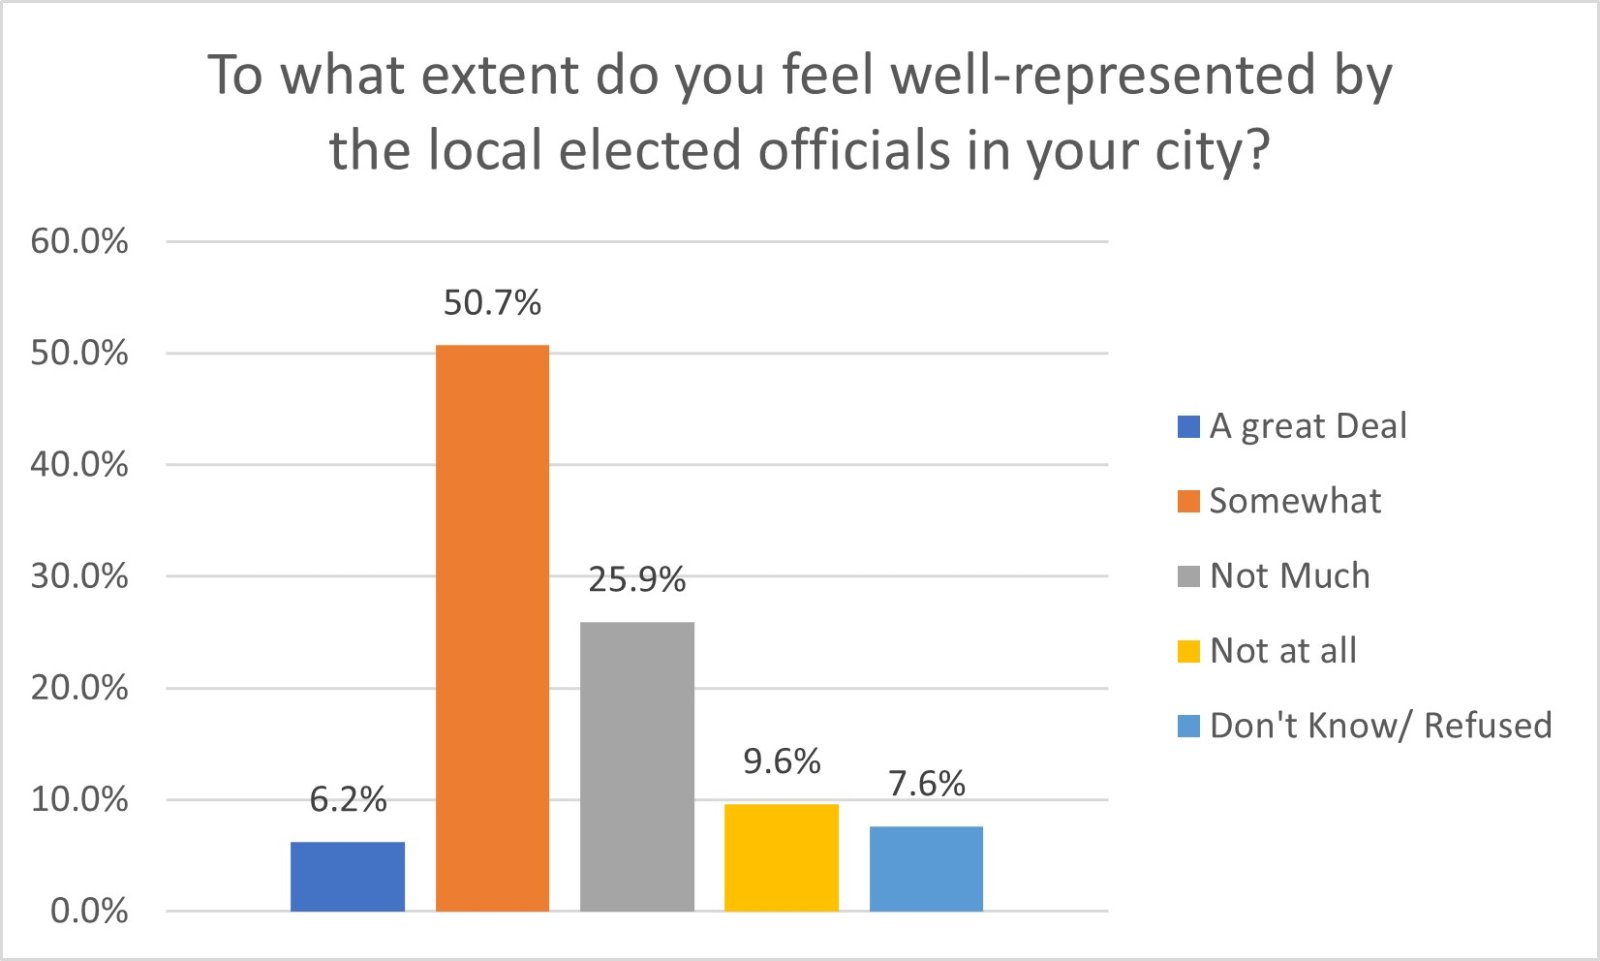 To what extent do you feel well-represented by the local elected officials in your city